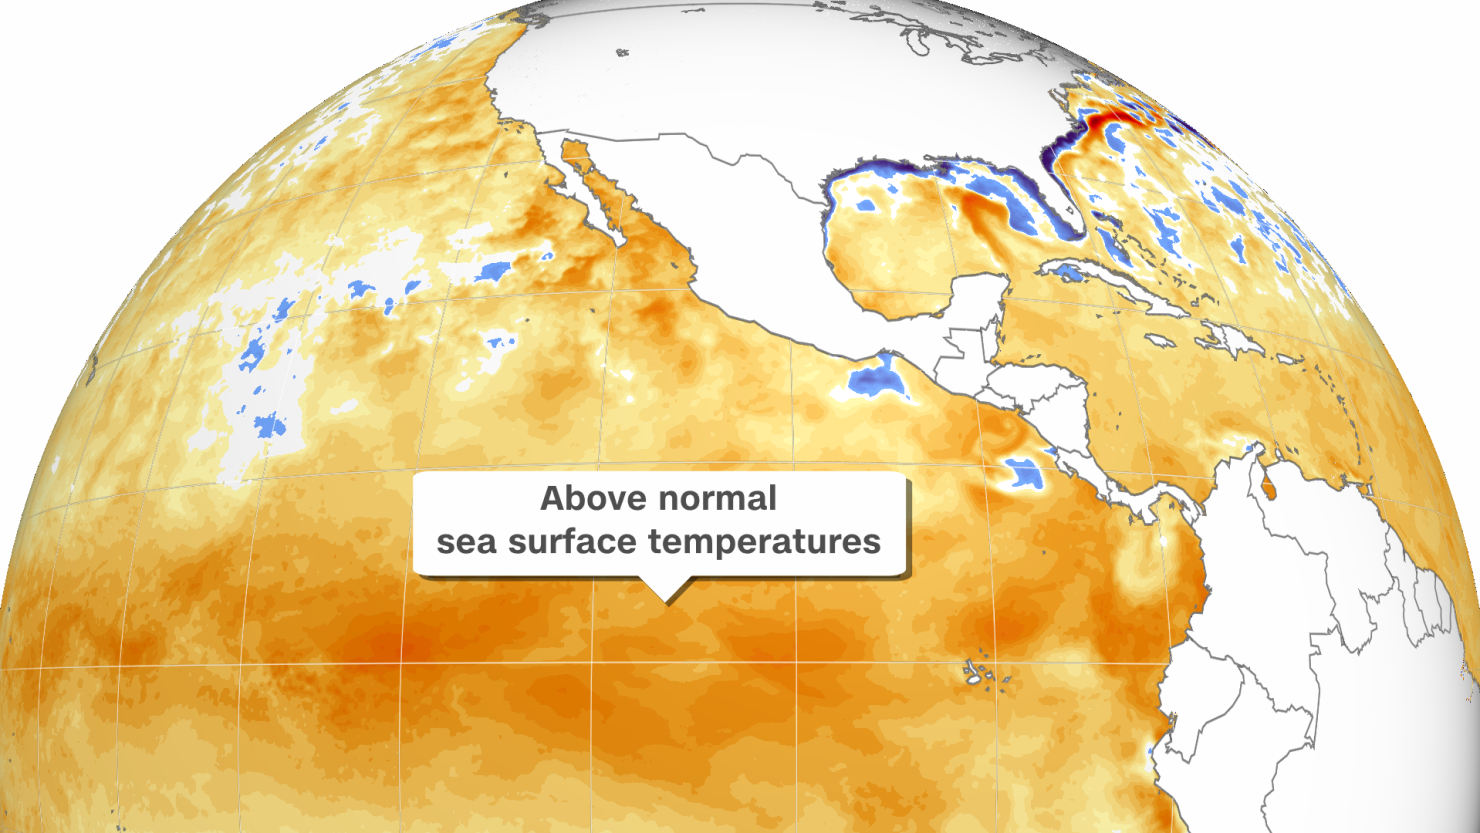 ‘Super El Niño’ is here, but La Niña looks likely. What’s in store for